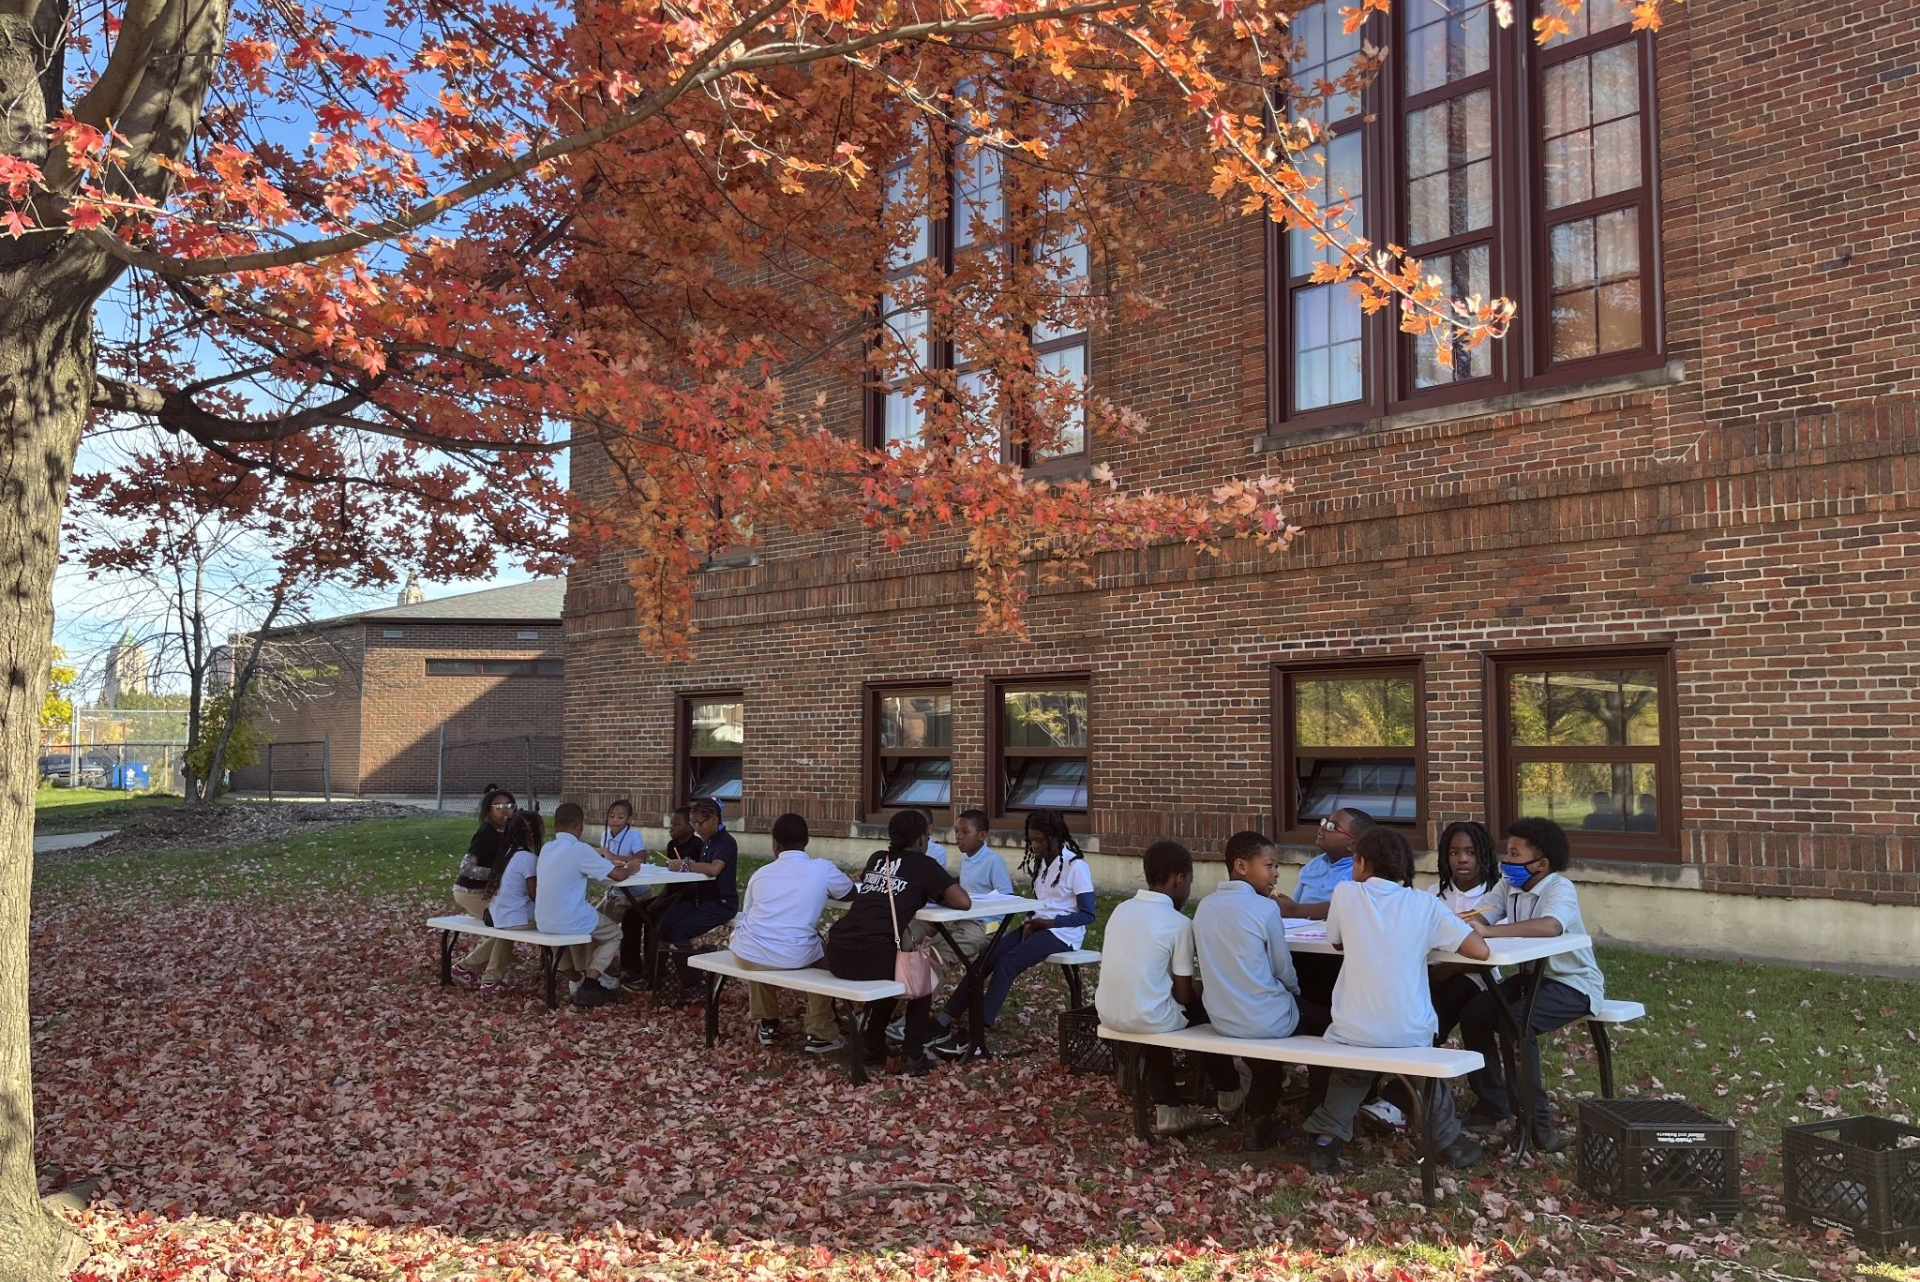 Students at Thirkell Elementary-Middle School take advantage of the outdoor classroom that they helped build.